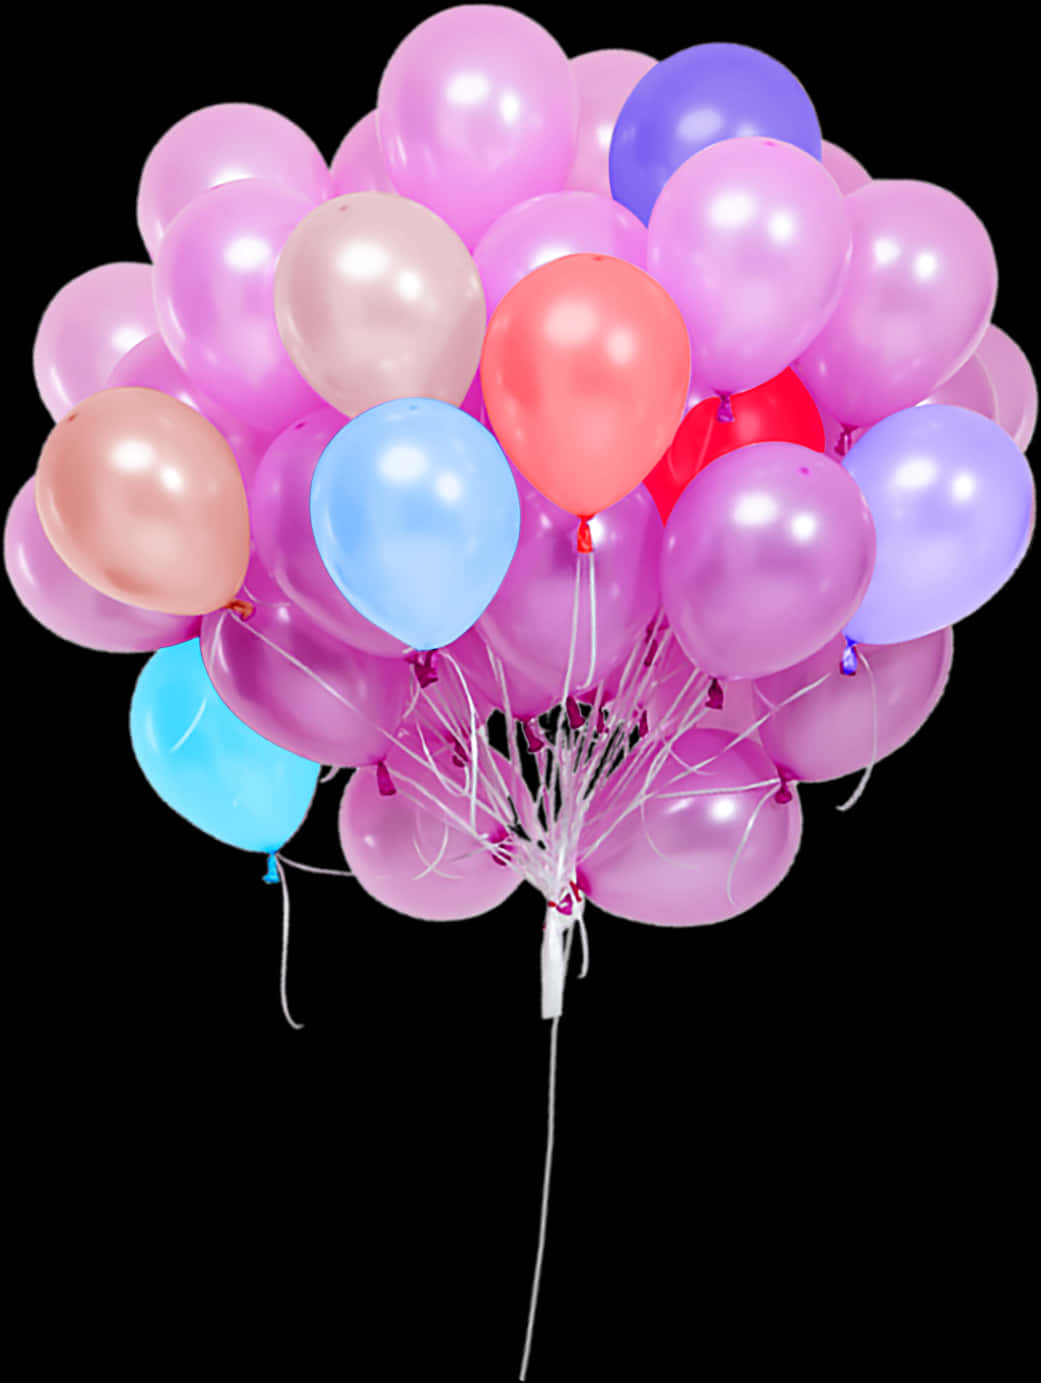 Colorful Balloons Bunch Transparent Background